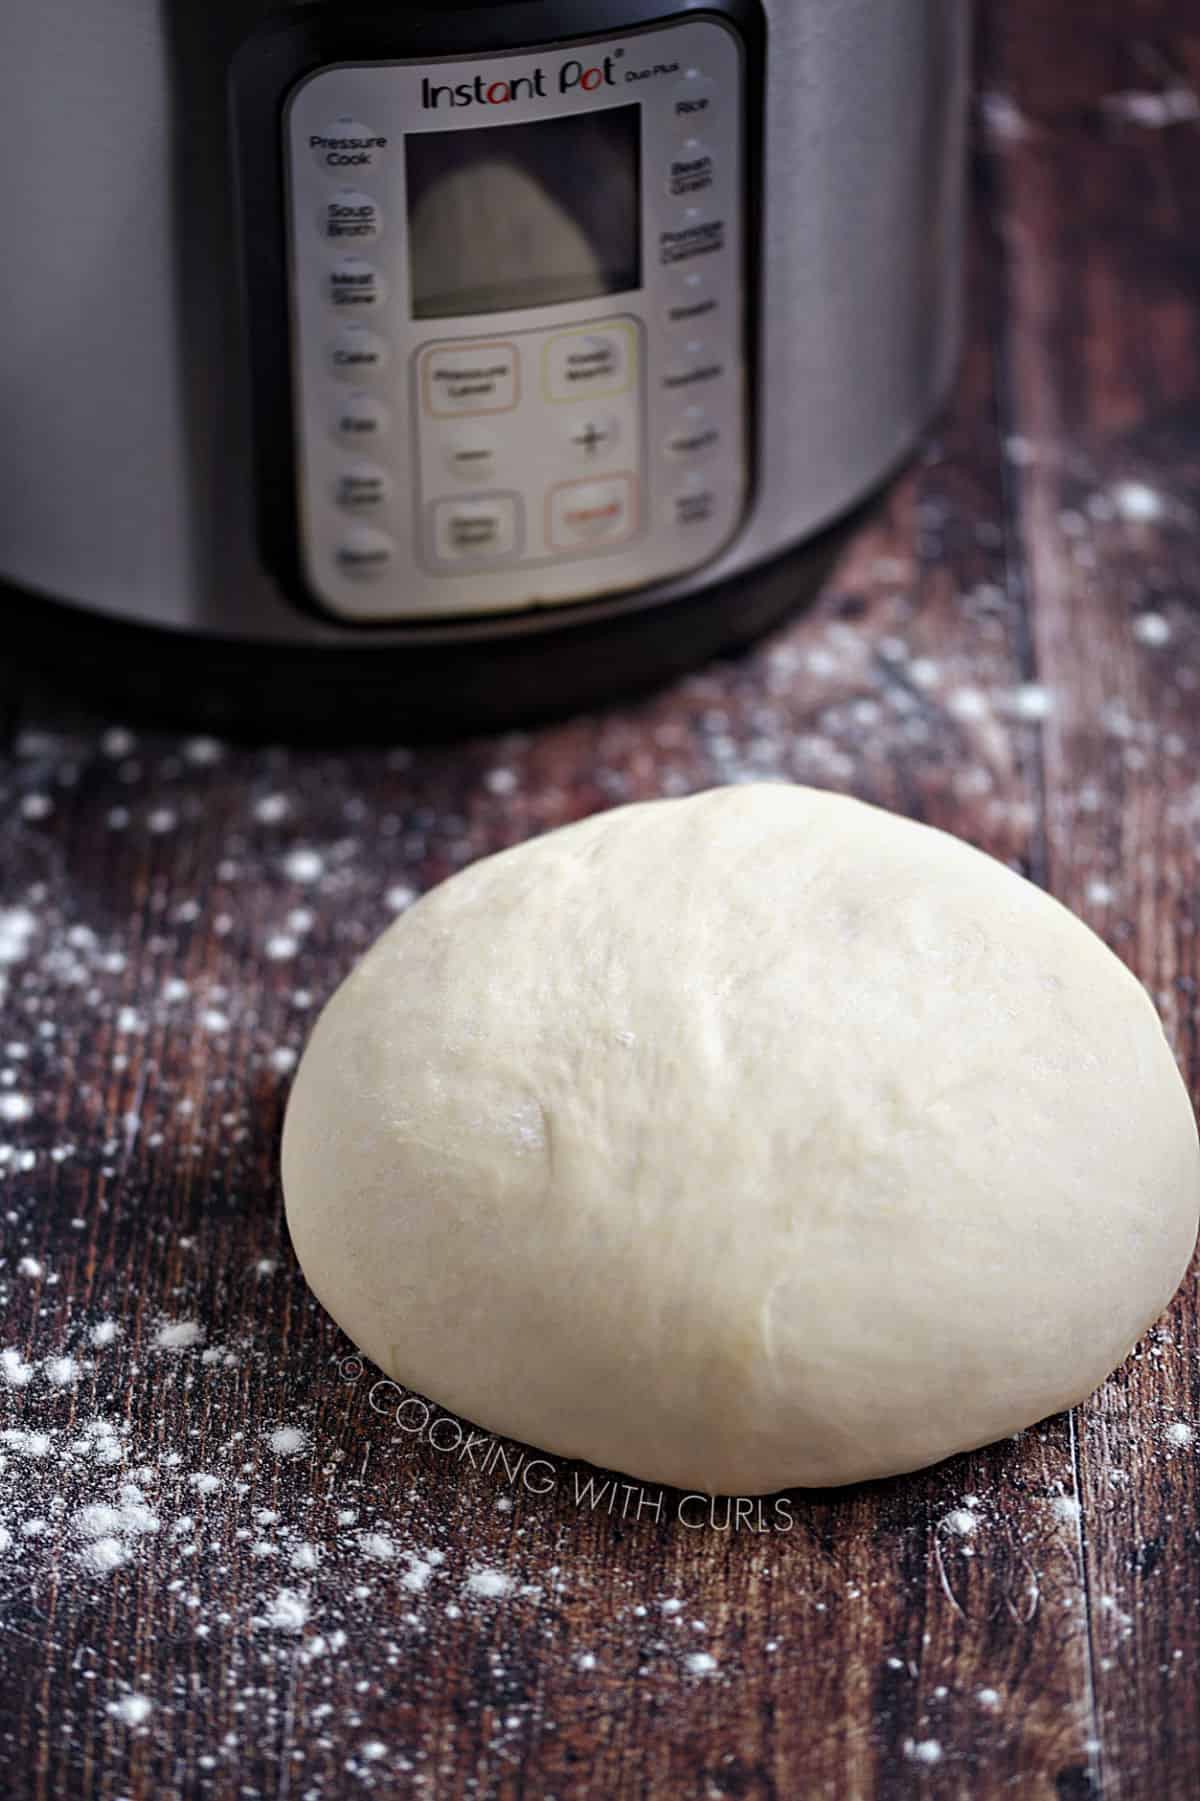 Dough Proofed in an Instant Pot sitting on a wood surface surrounded by a dusting of flour.